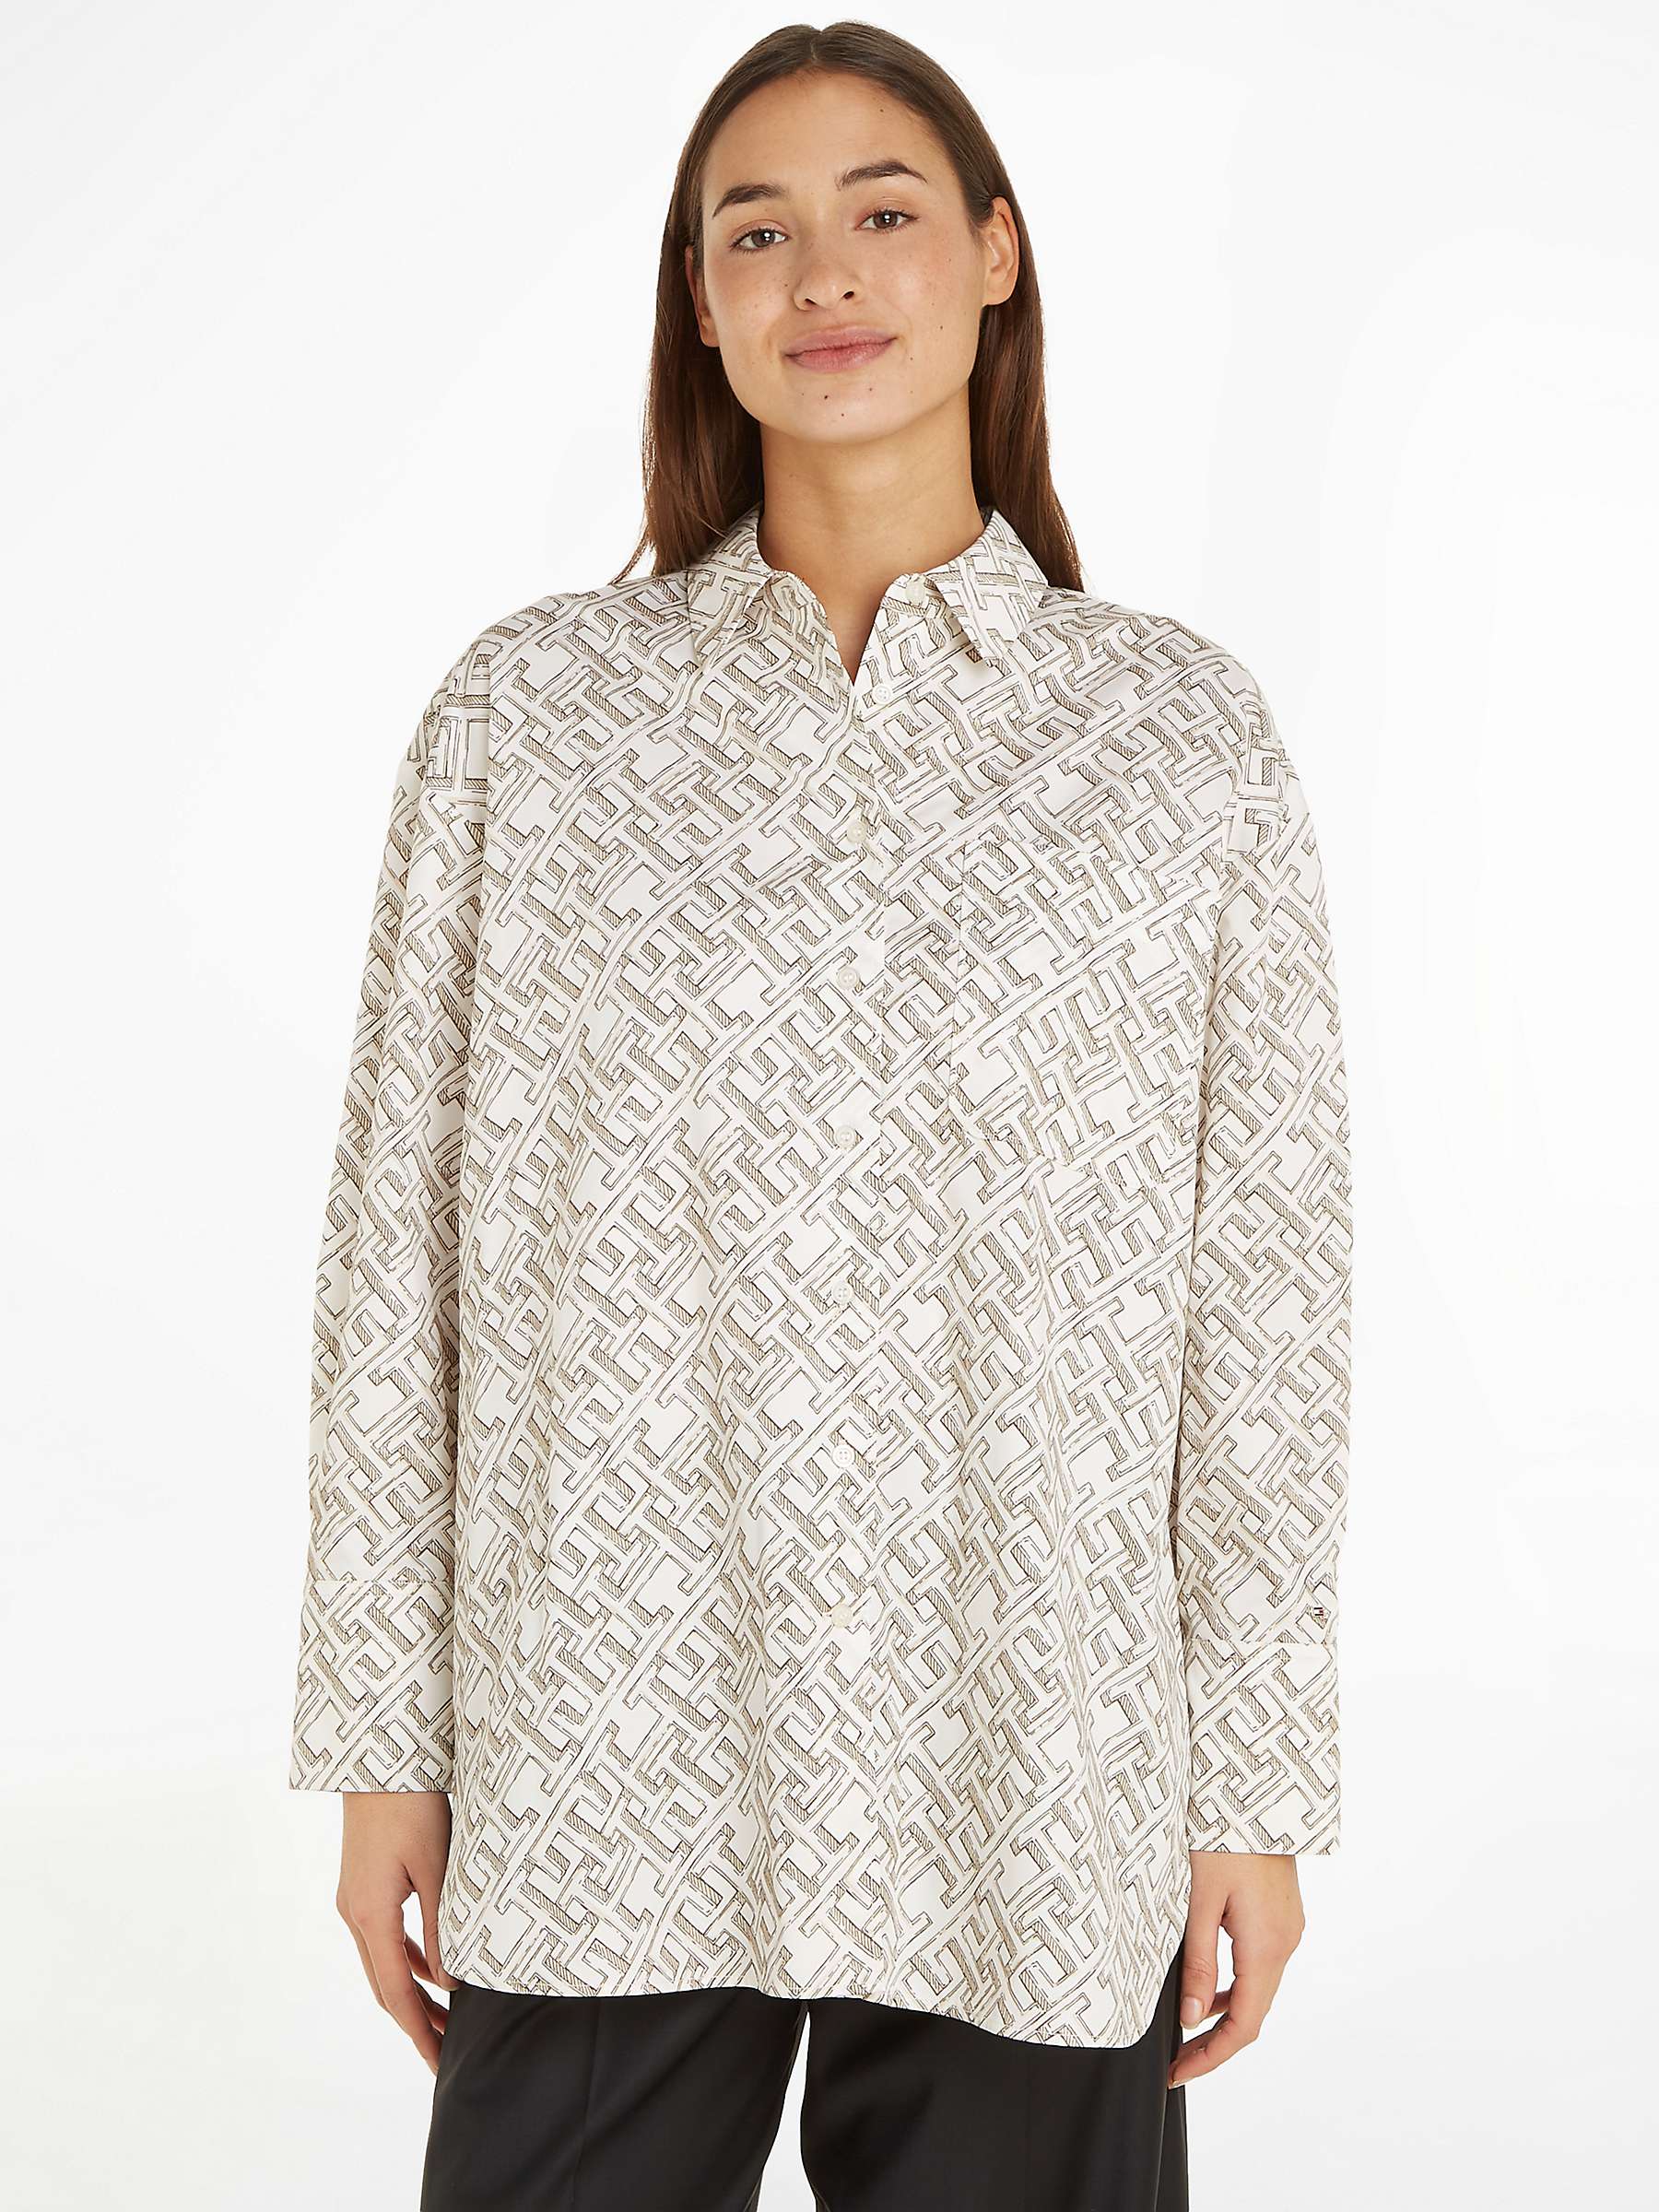 Buy Tommy Hilfiger Relaxed Print Shirt, Illustrated White Online at johnlewis.com